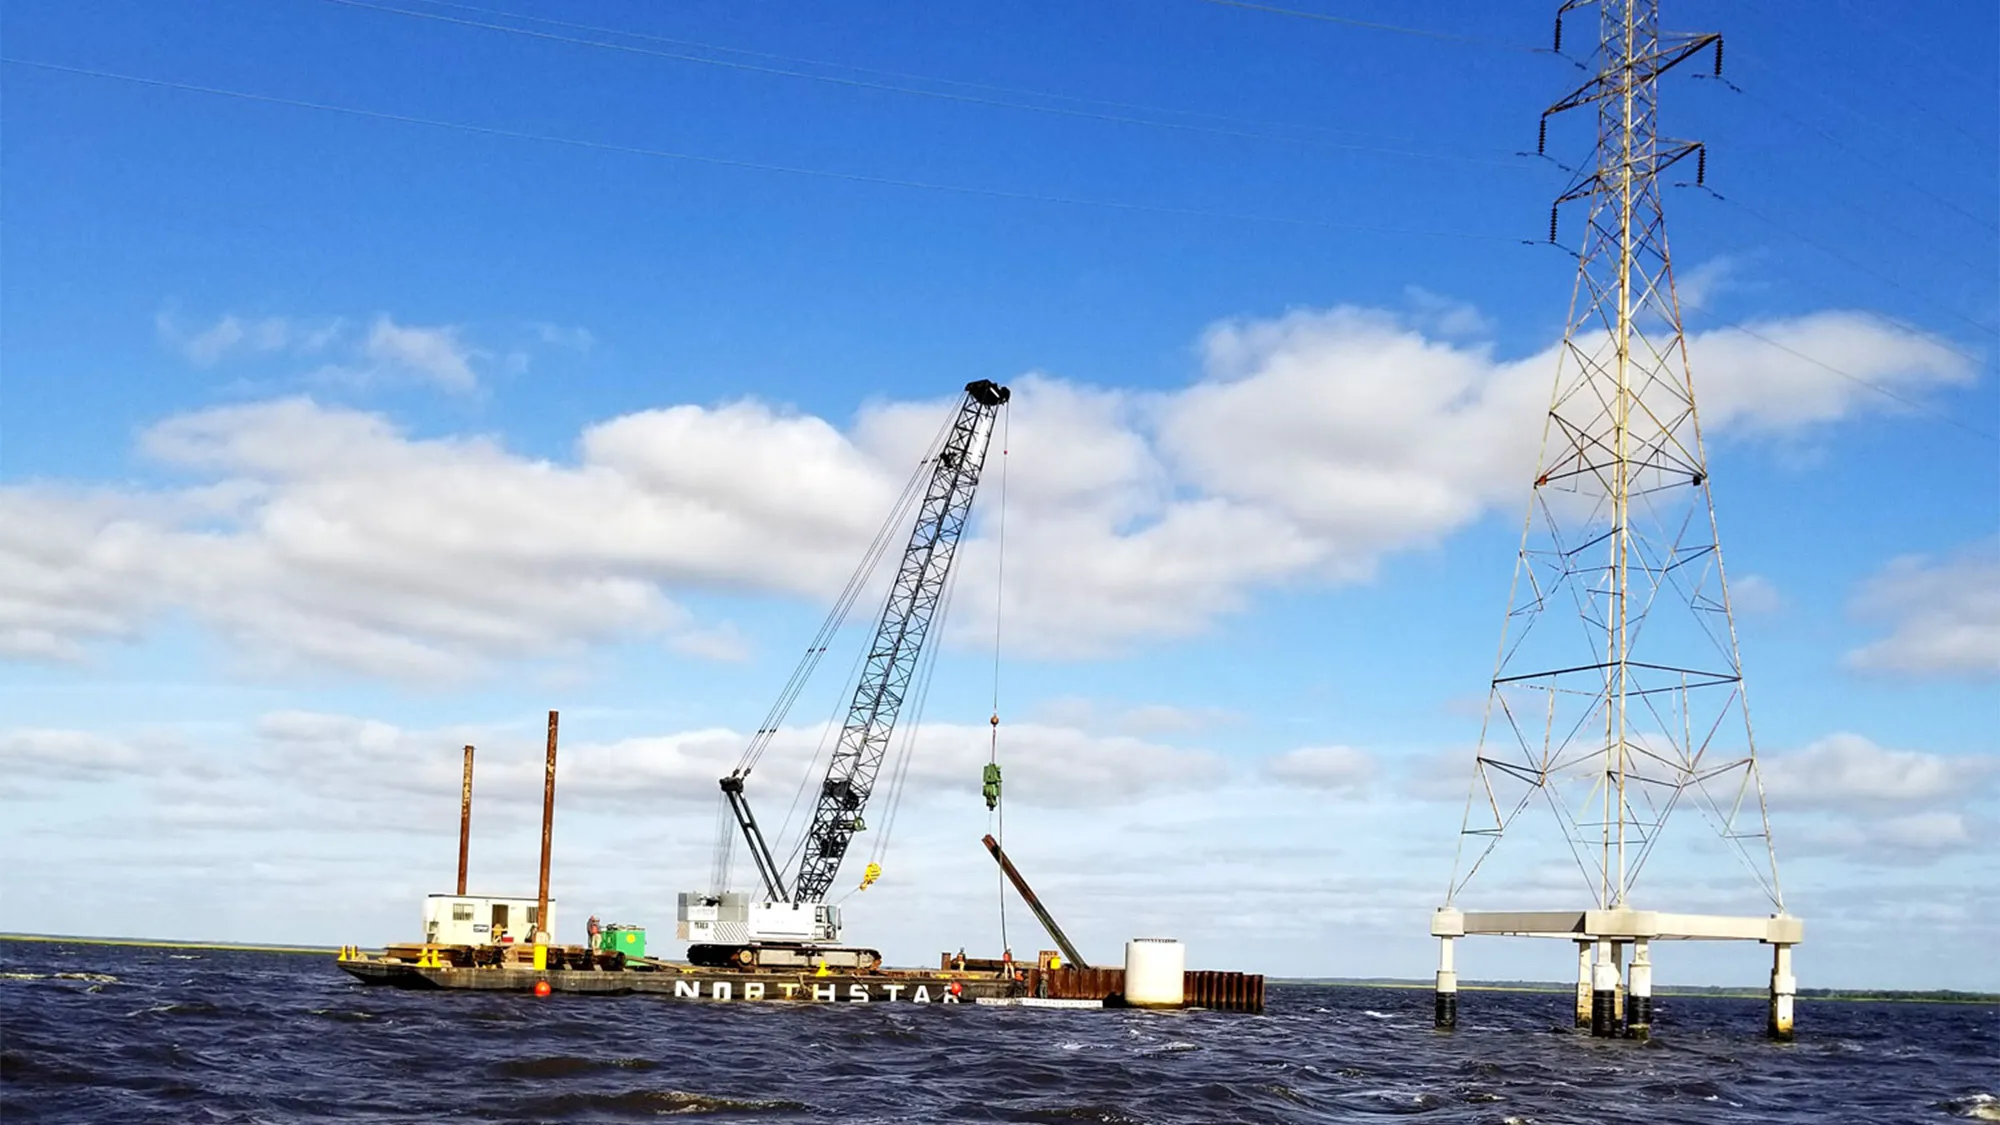 Crane on platform in water lifting a beam